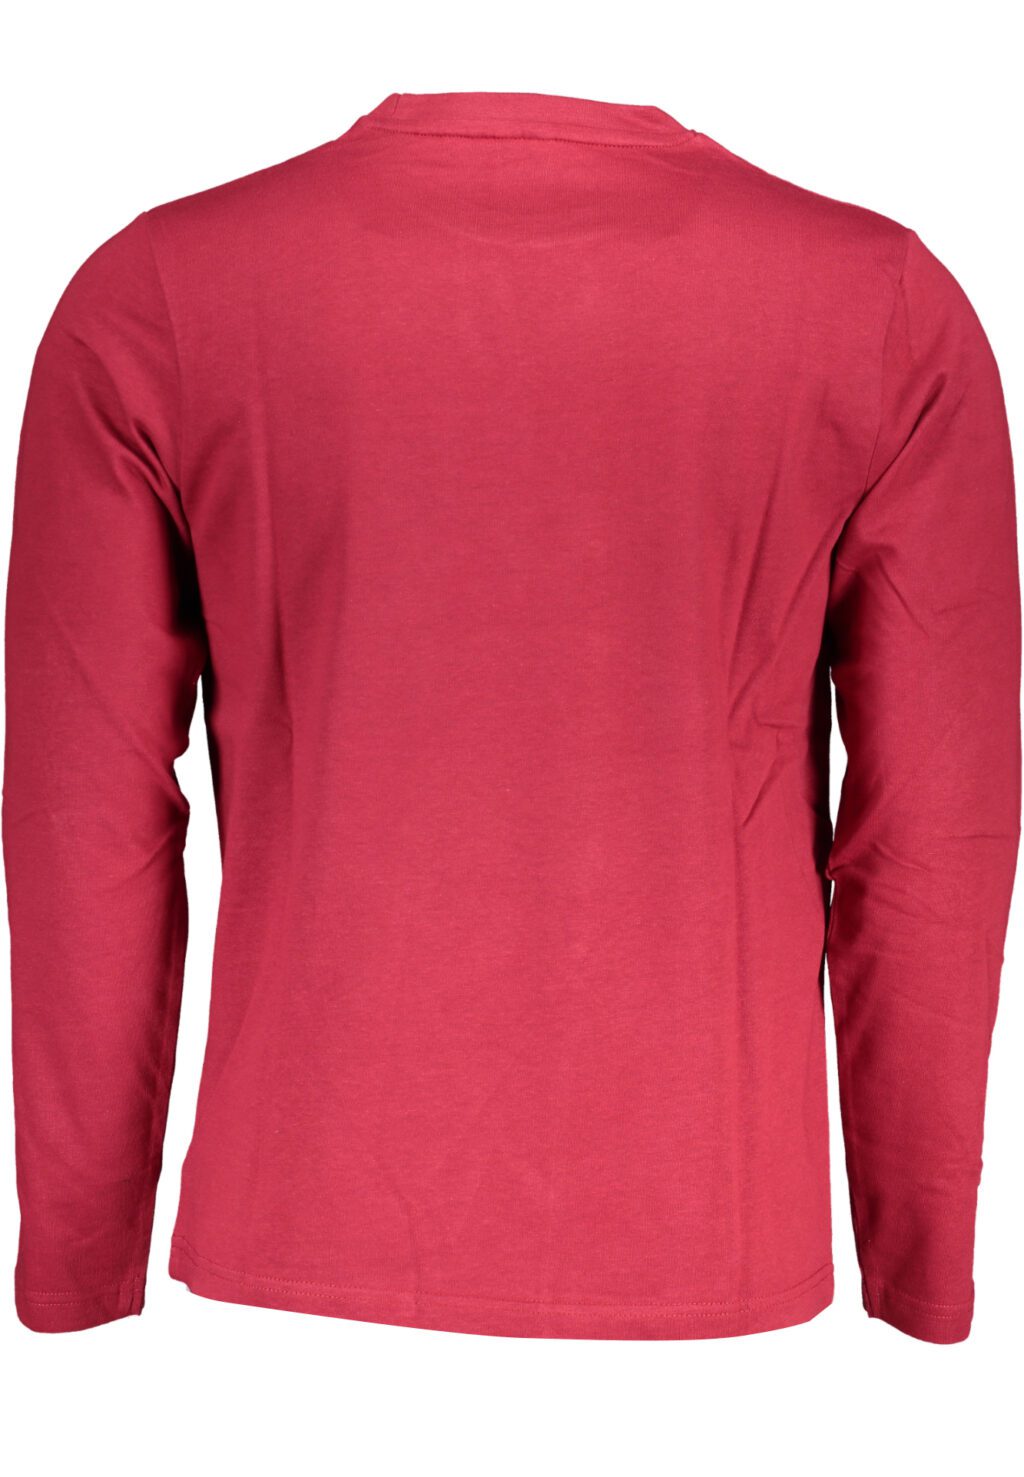 US GRAND POLO MEN'S LONG SLEEVE T-SHIRT RED UST871_ROROSSO